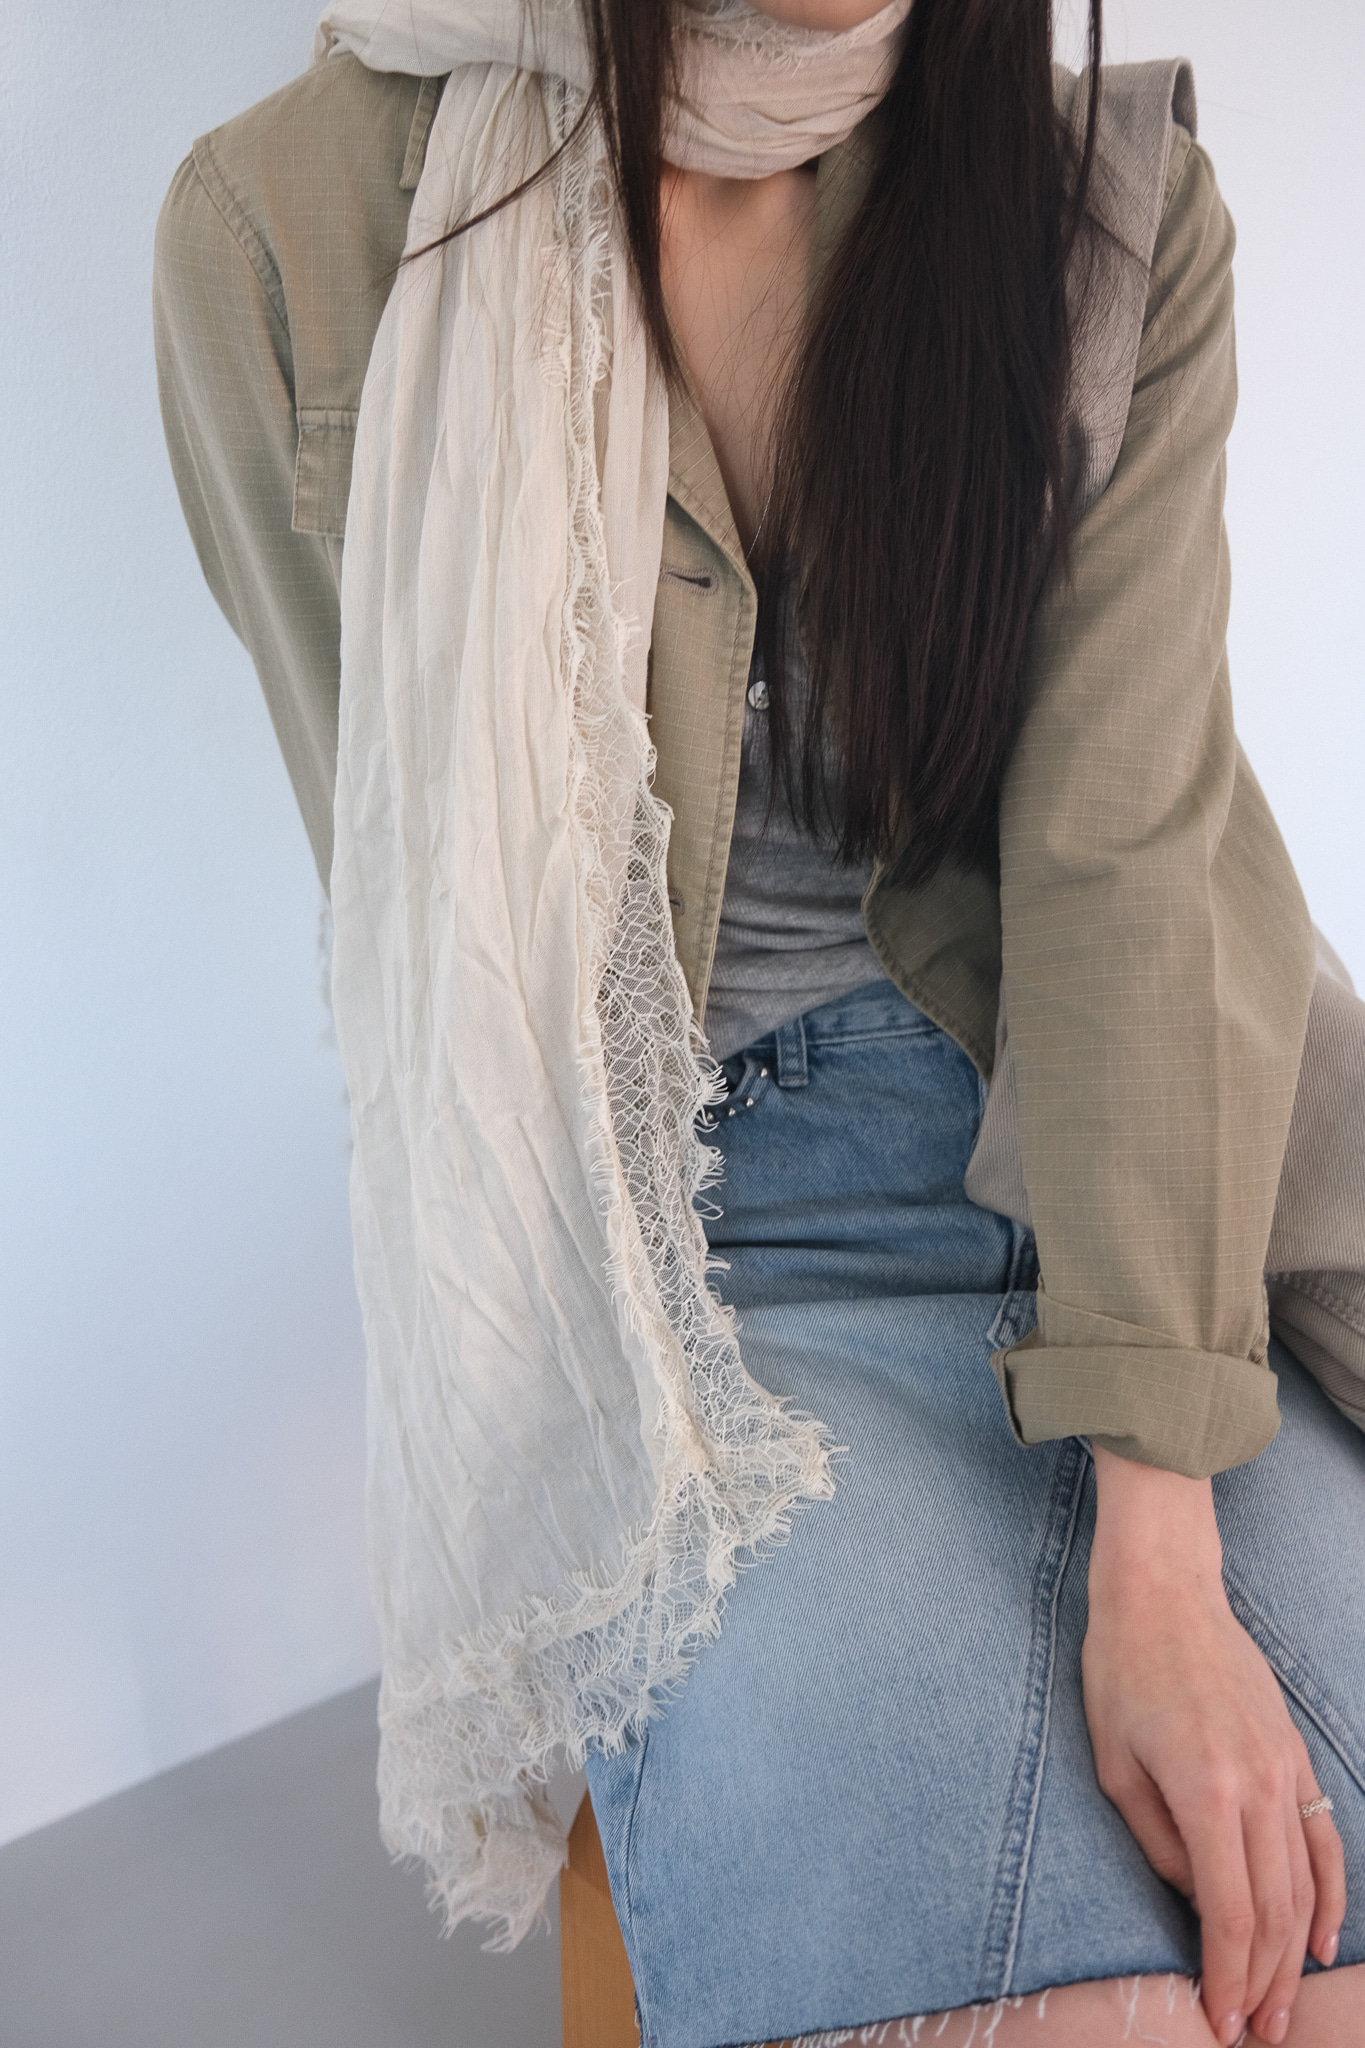 Soft lace scarf